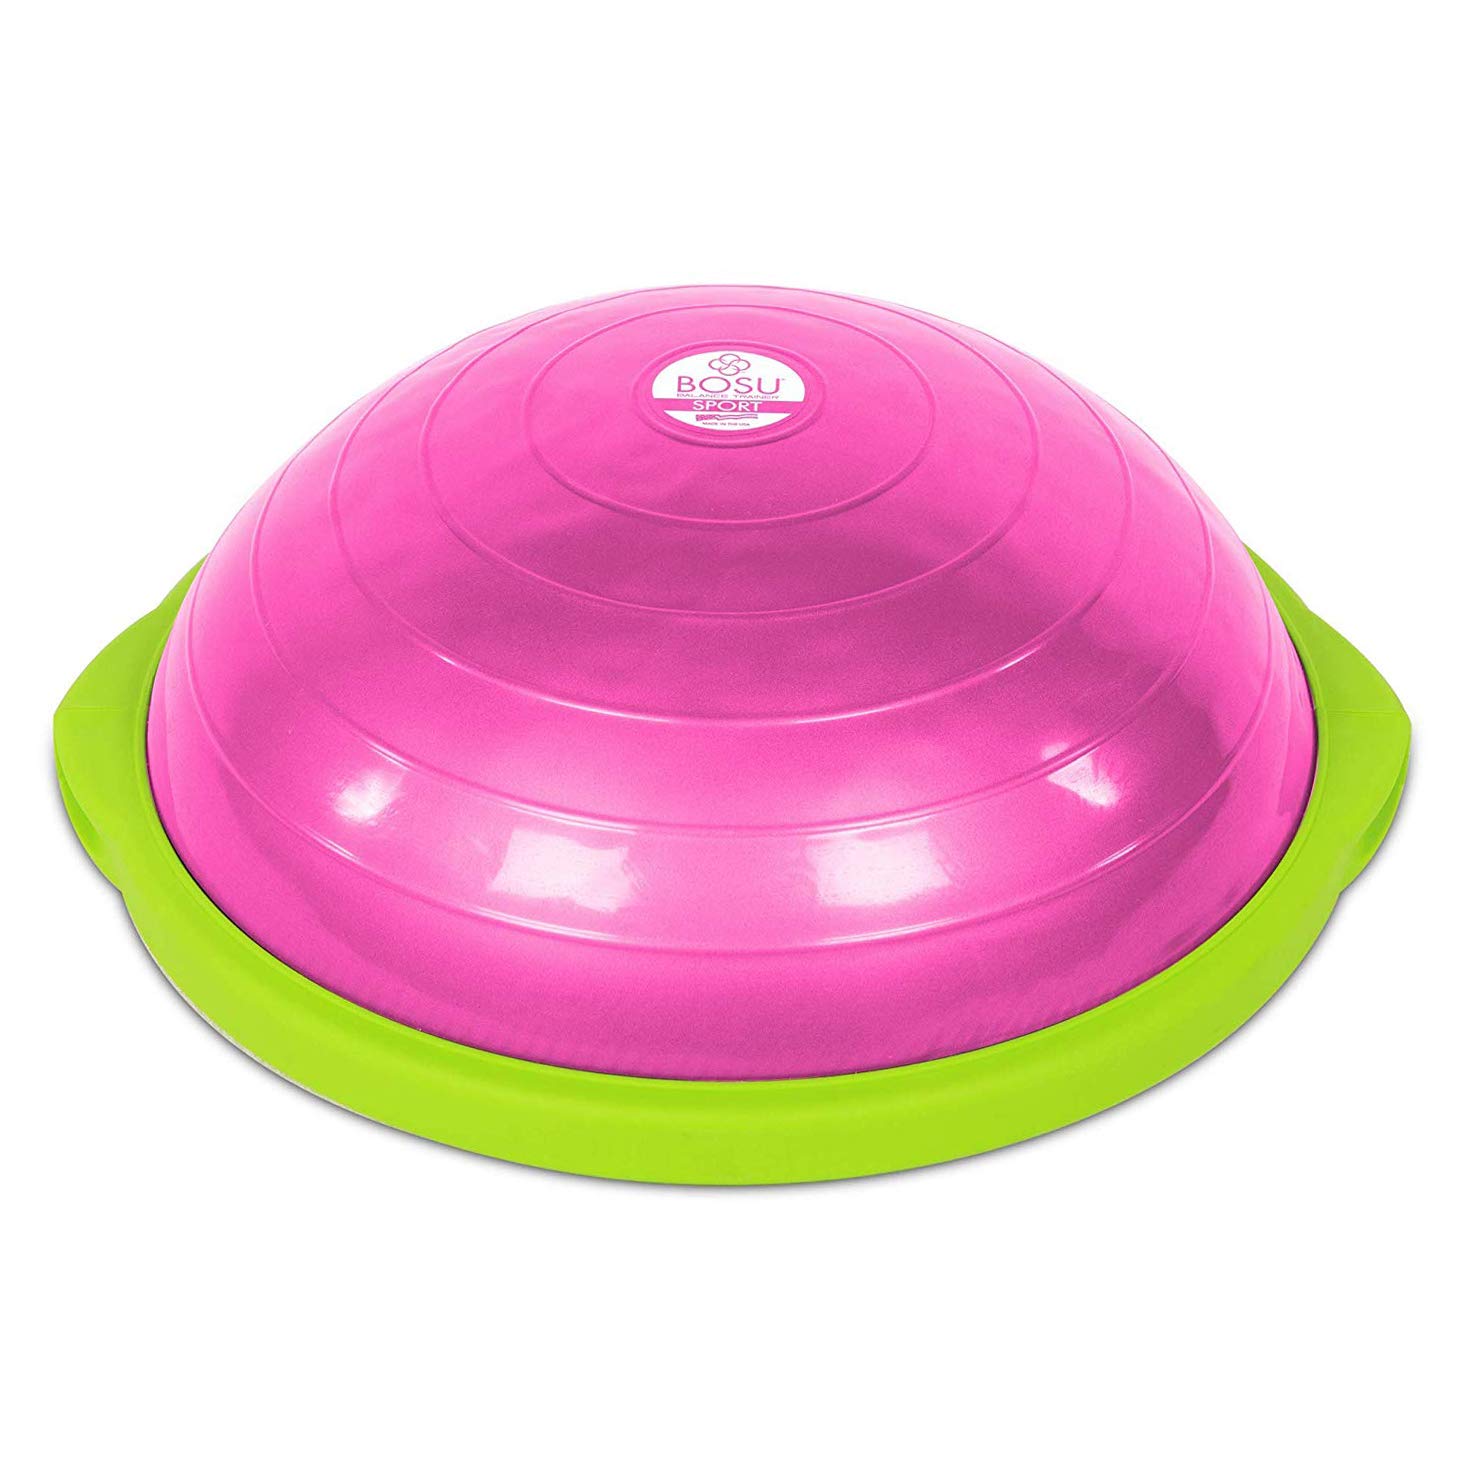 Bosu 50-centimeter Dynamic Non-Slip Travel-Size Home gym Workout Balance Ball Pod Trainer for Strength and Flexibility, Pink